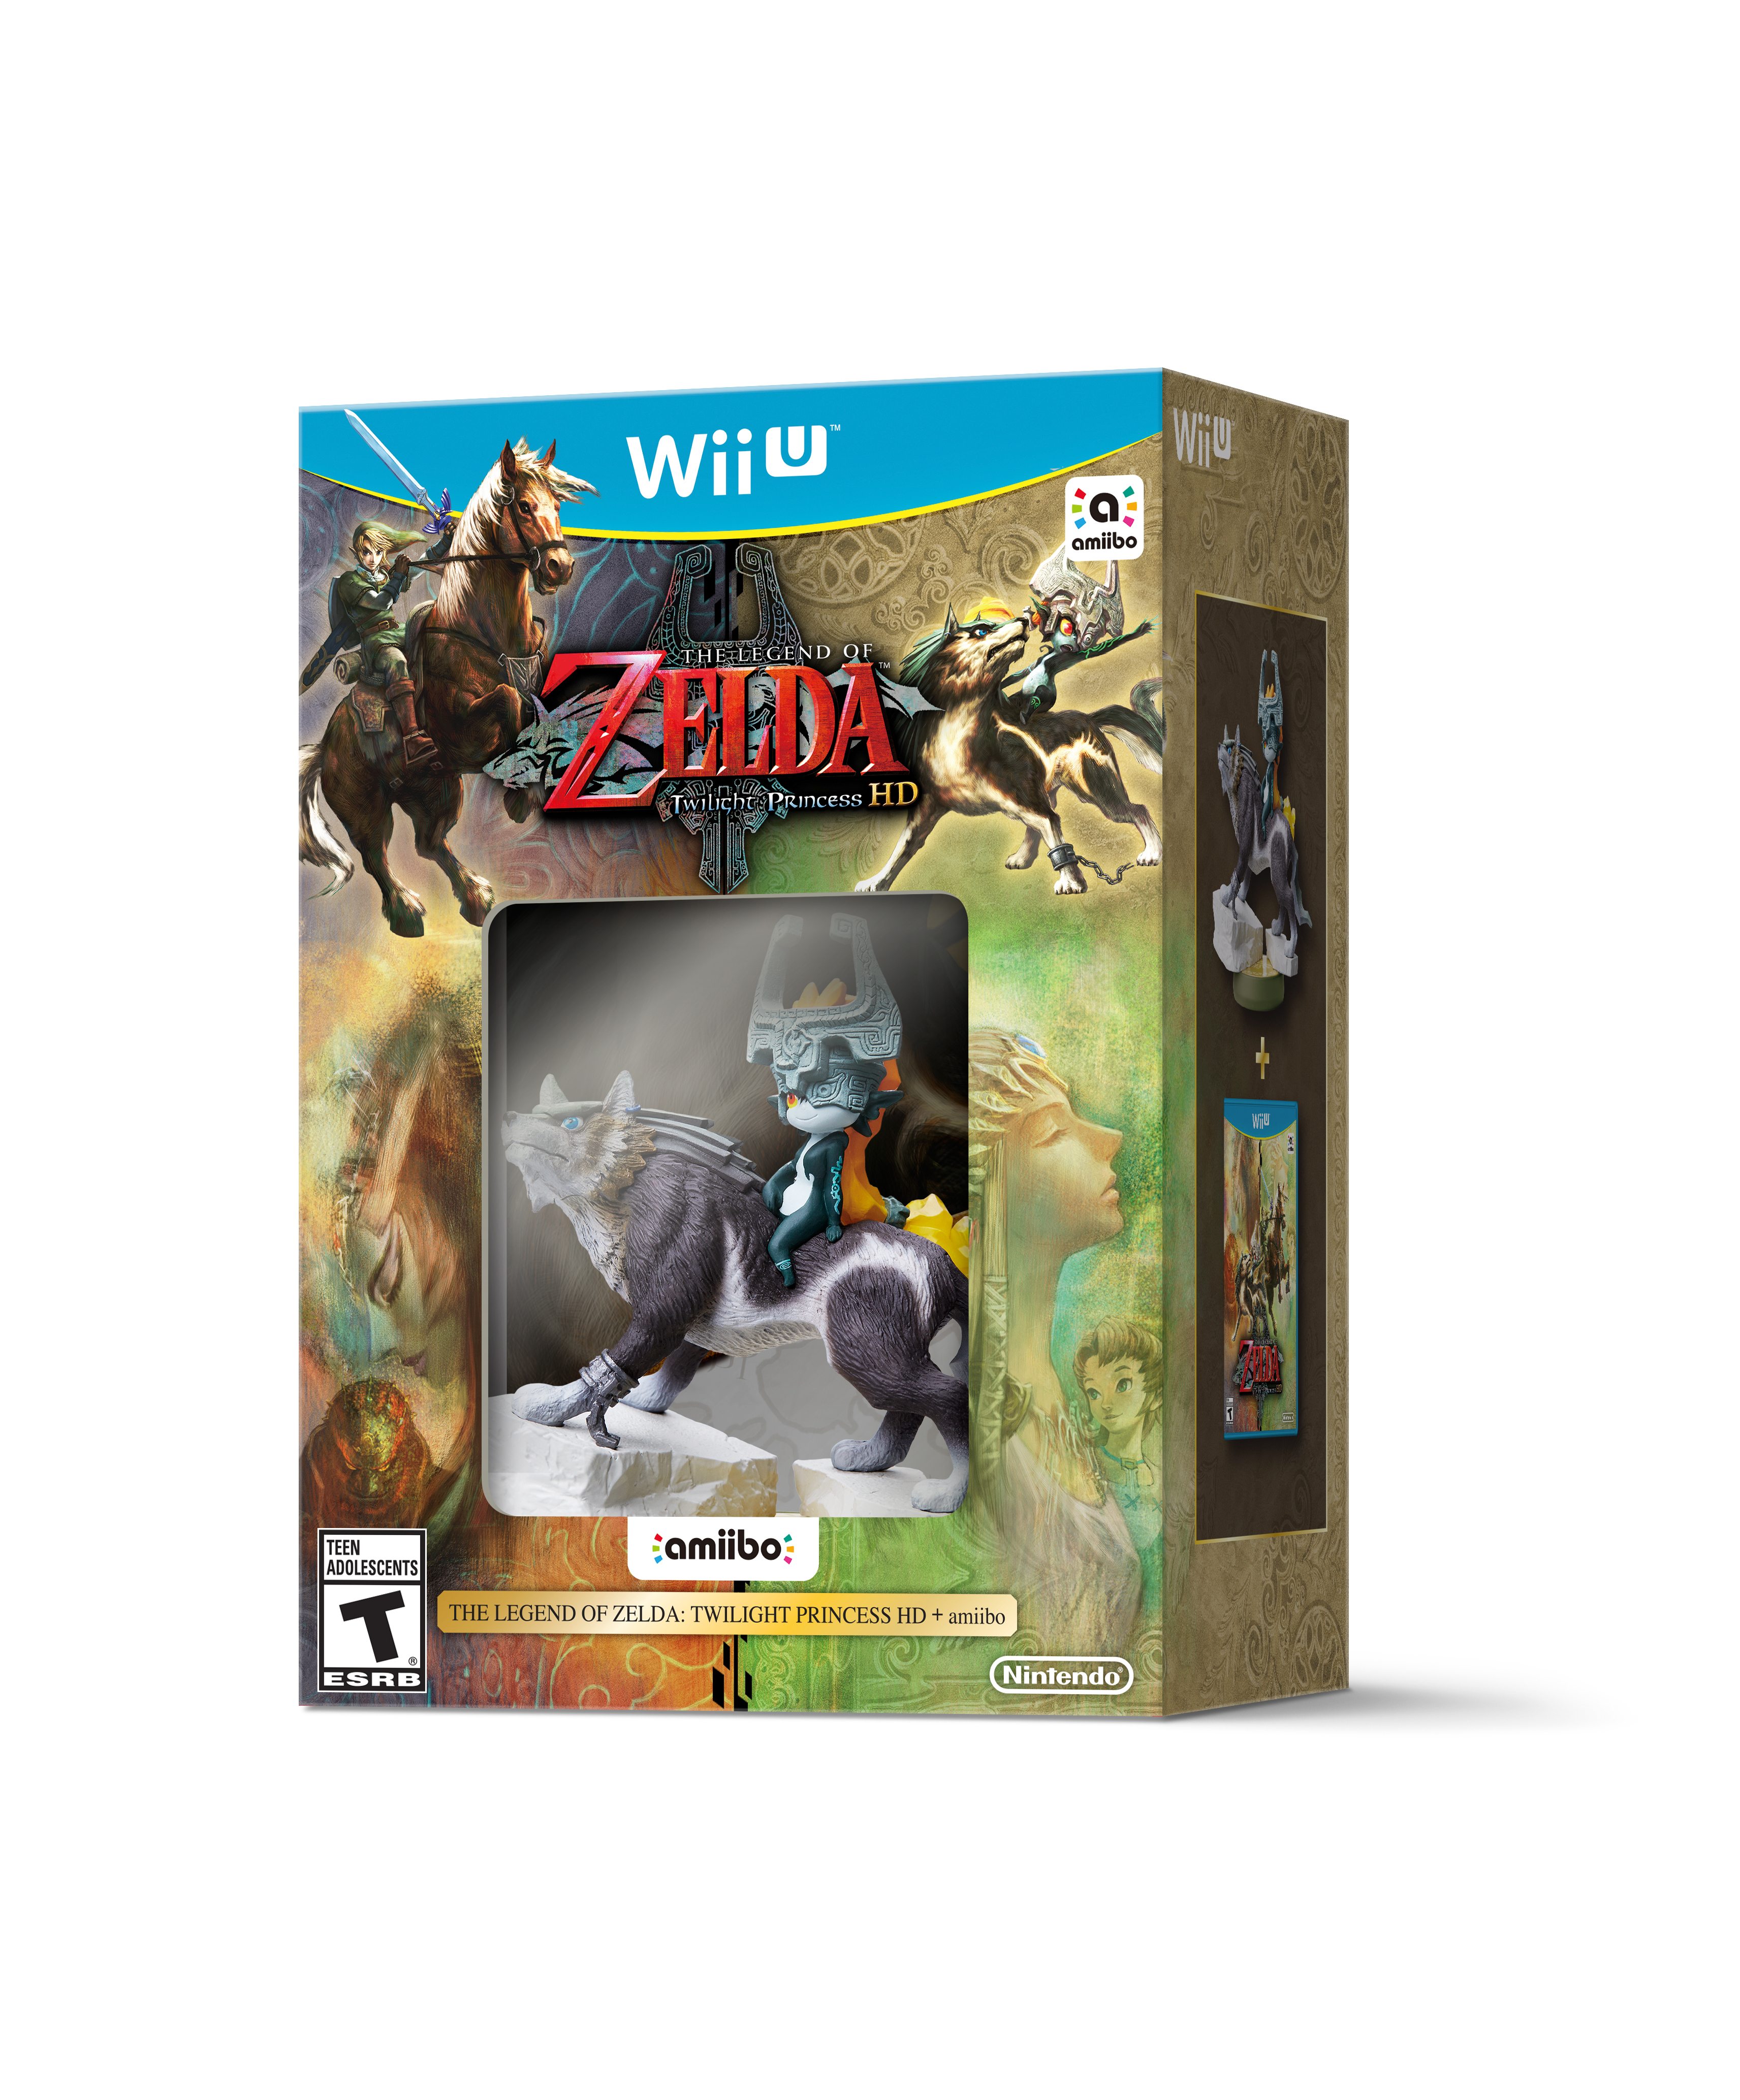 Nintendo Brings New amiibo Figures and Functionality to Games in Early 2016  | Business Wire